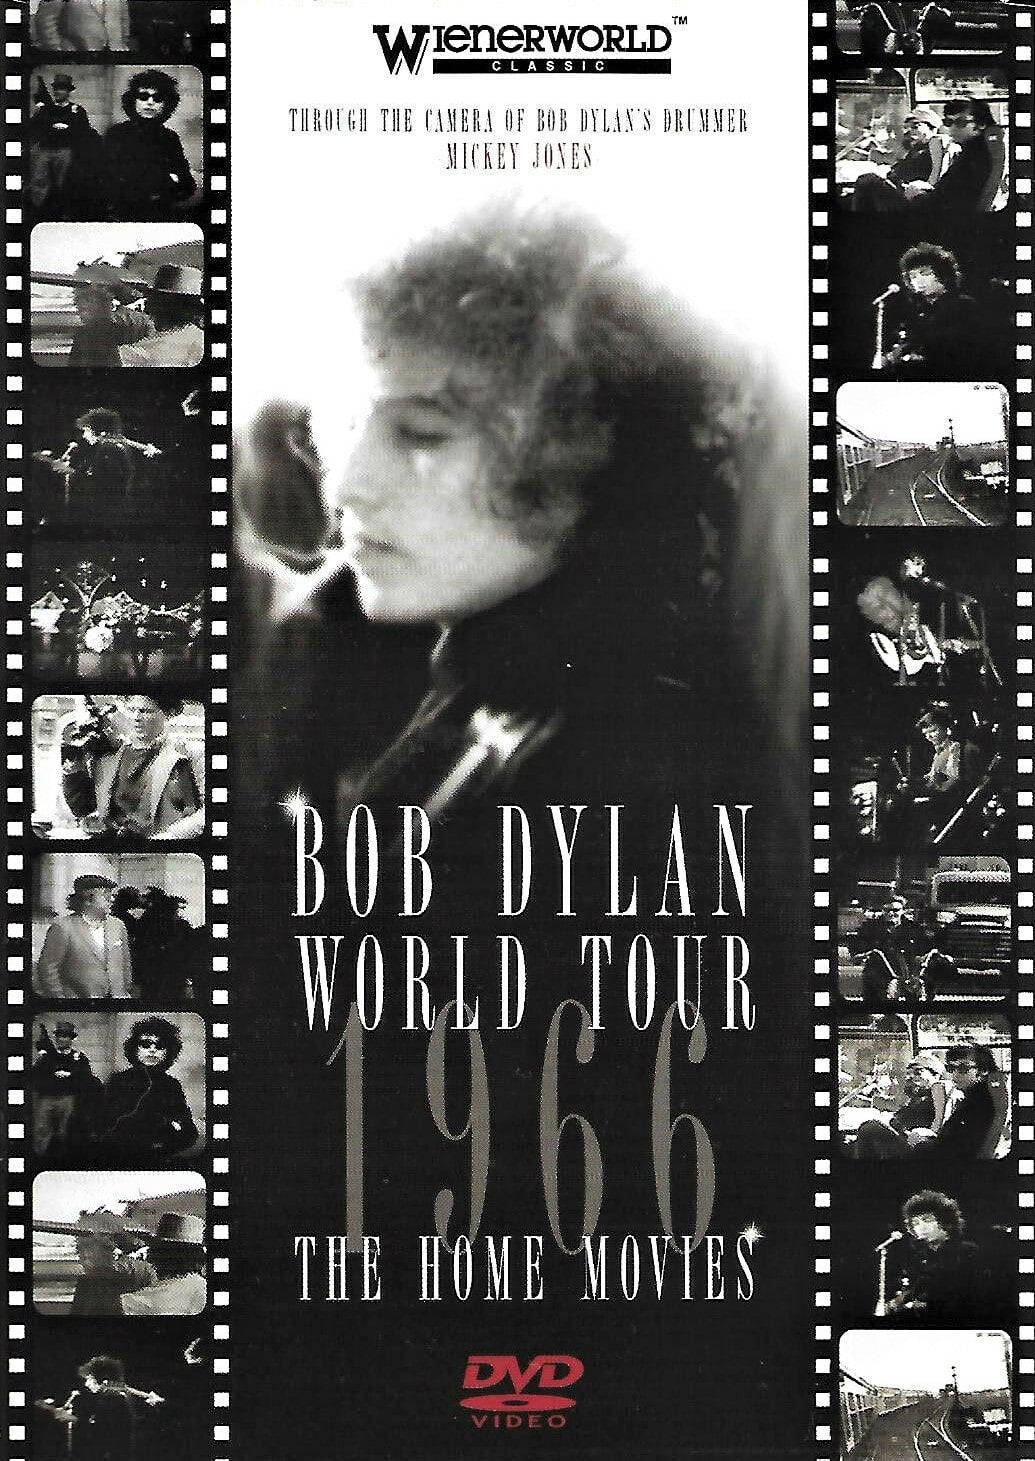 Bob Dylan ‎– World tour 1966 The home movies